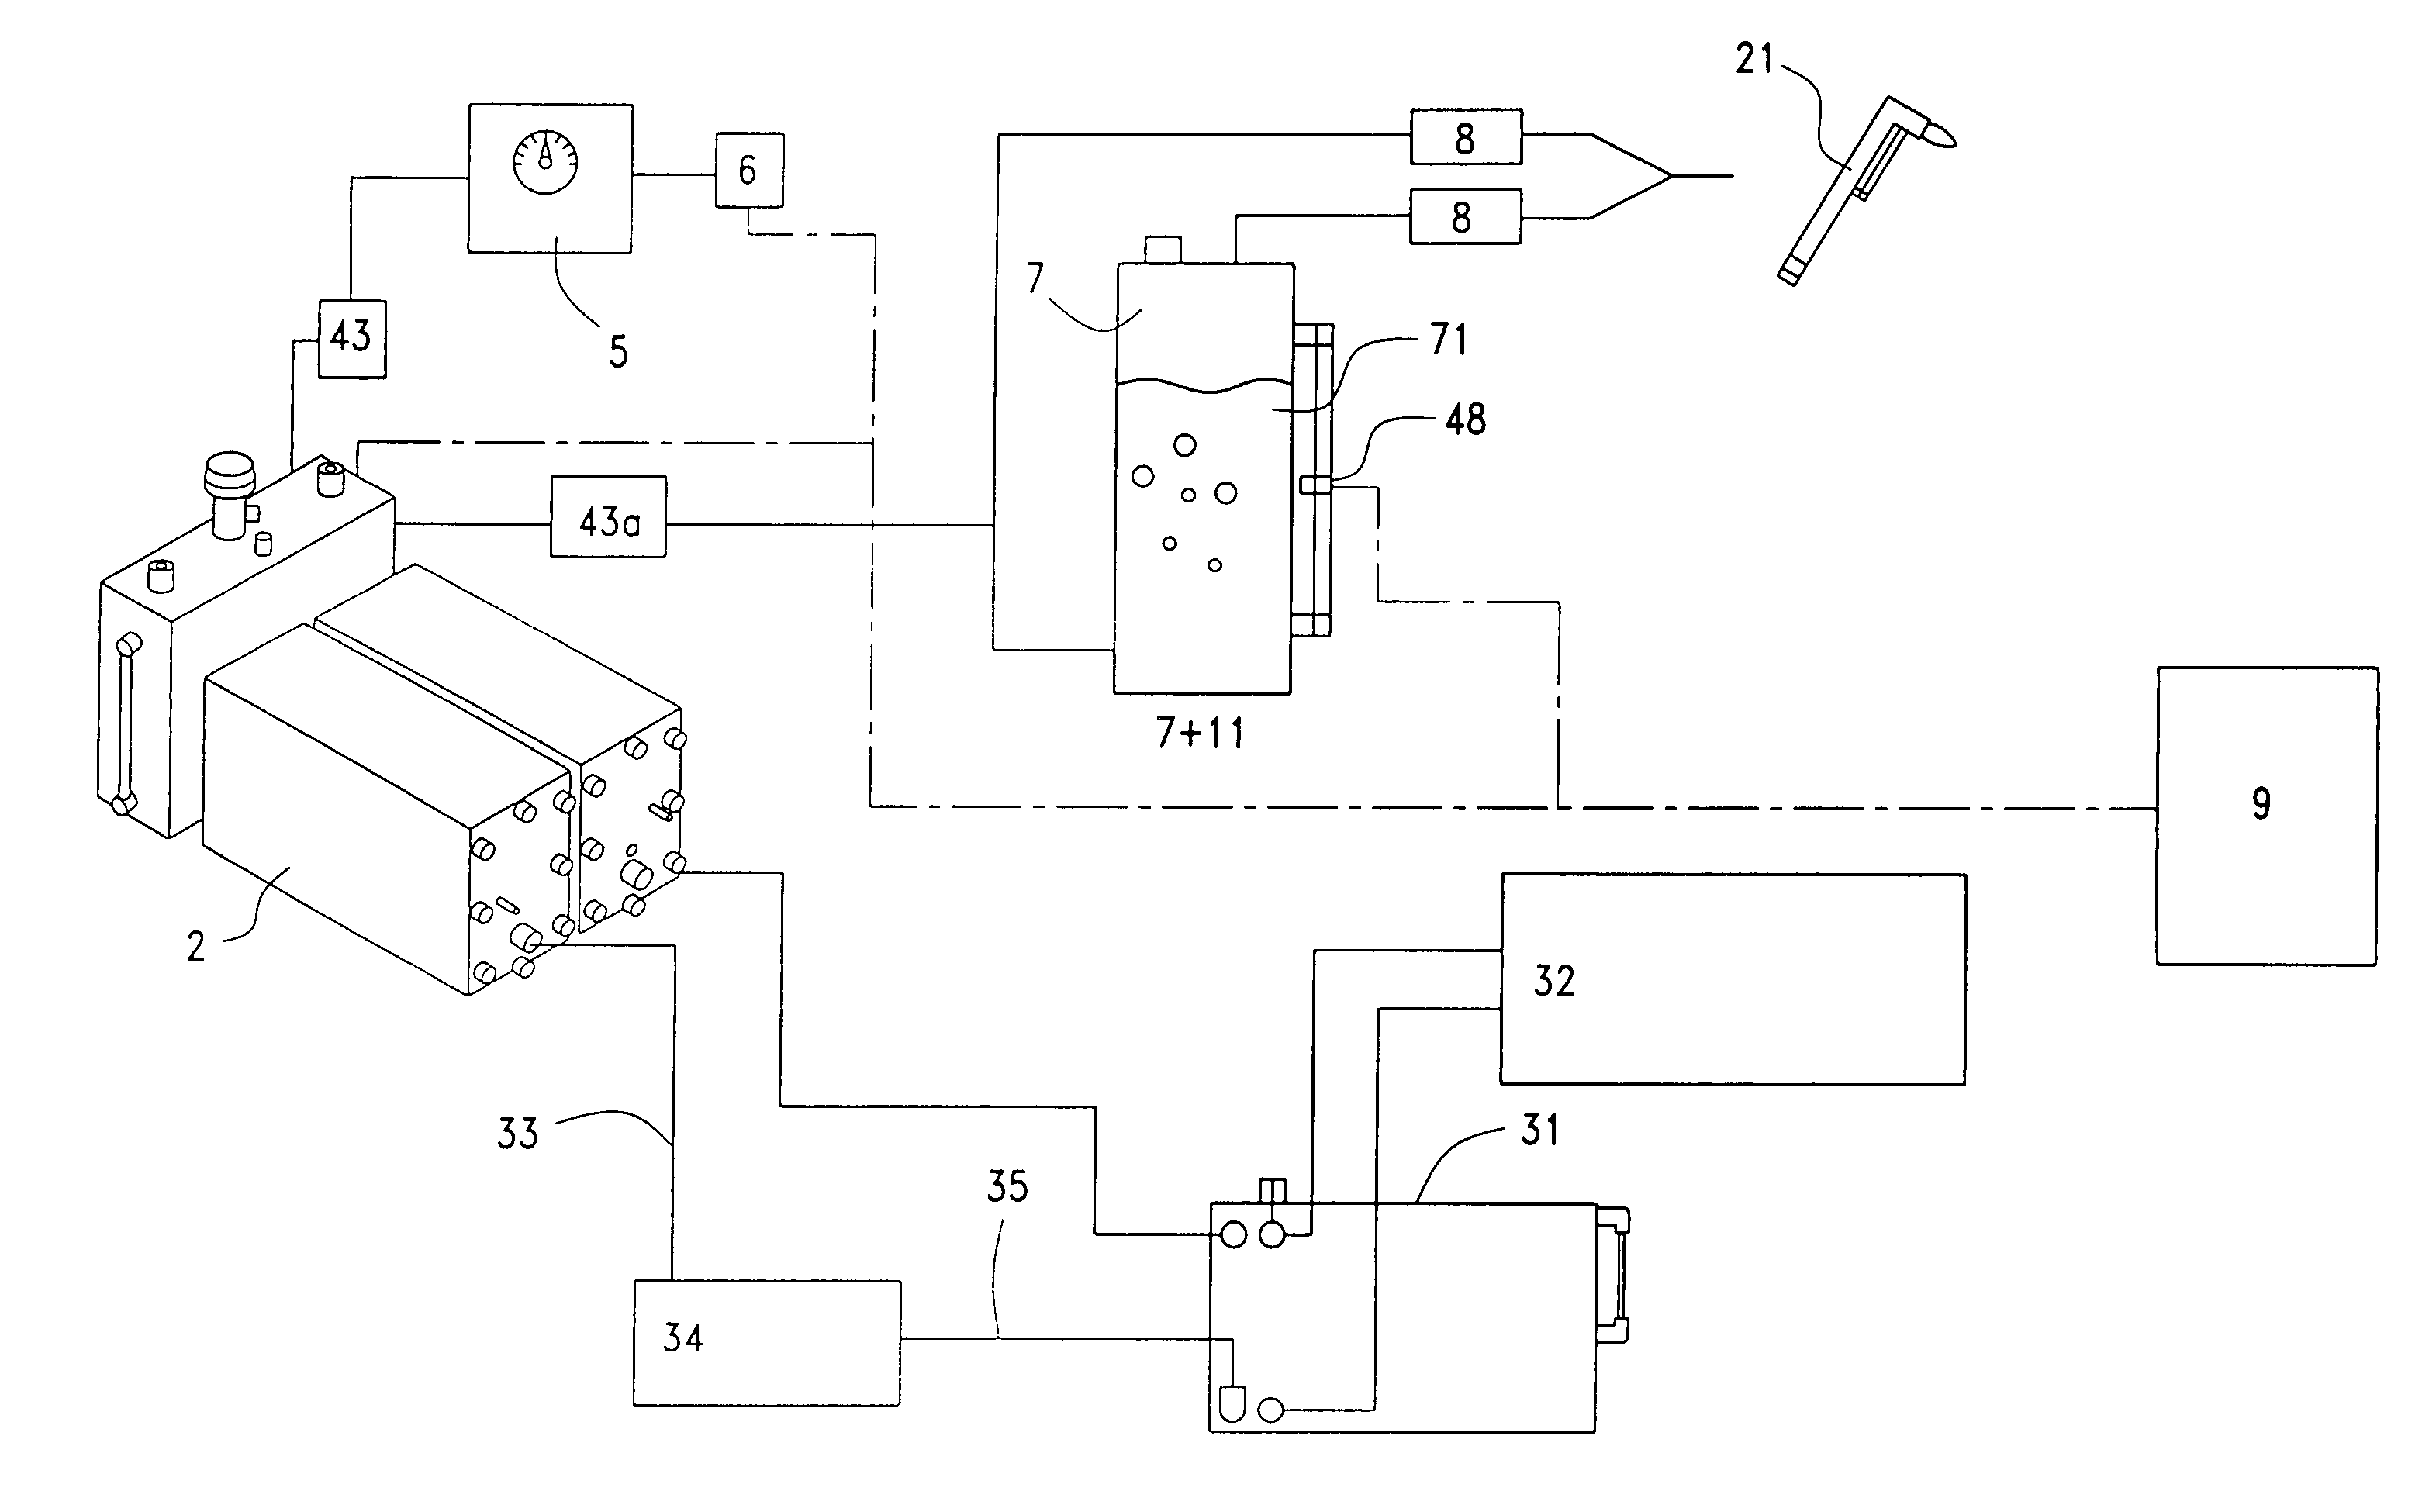 Hydrogen/oxygen generating system with temperature control